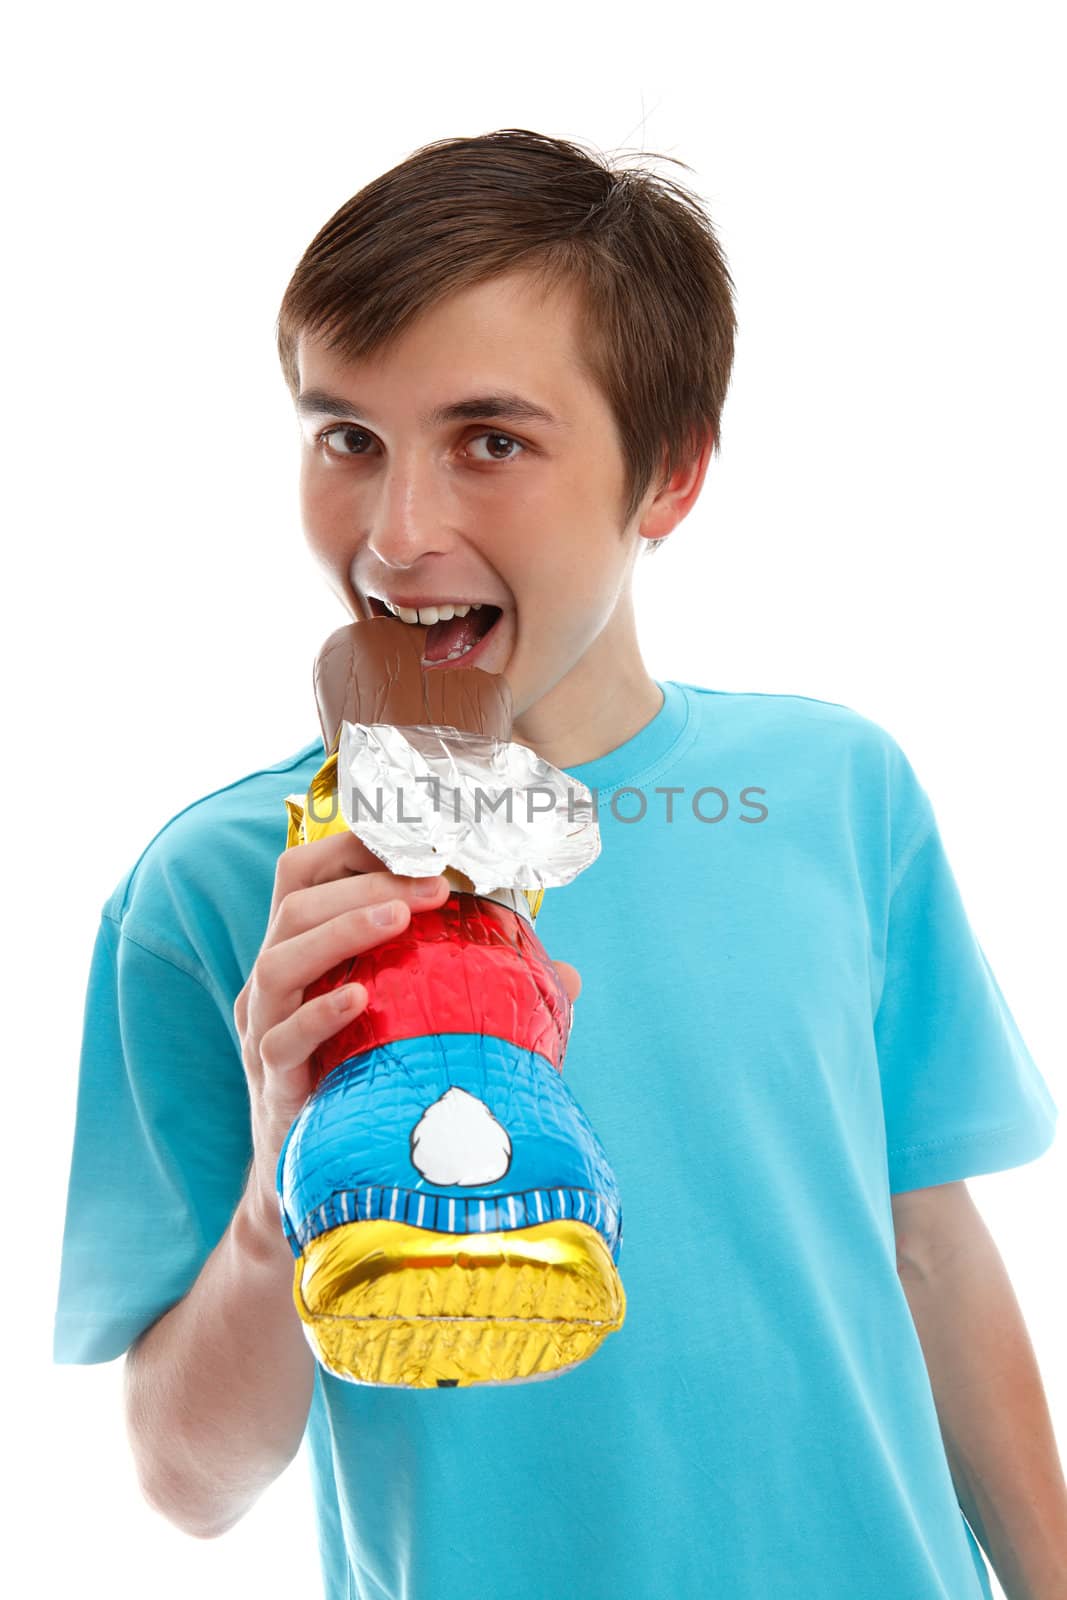 Smiling happy boy eating a milk chcolate  easter rabbit. White background